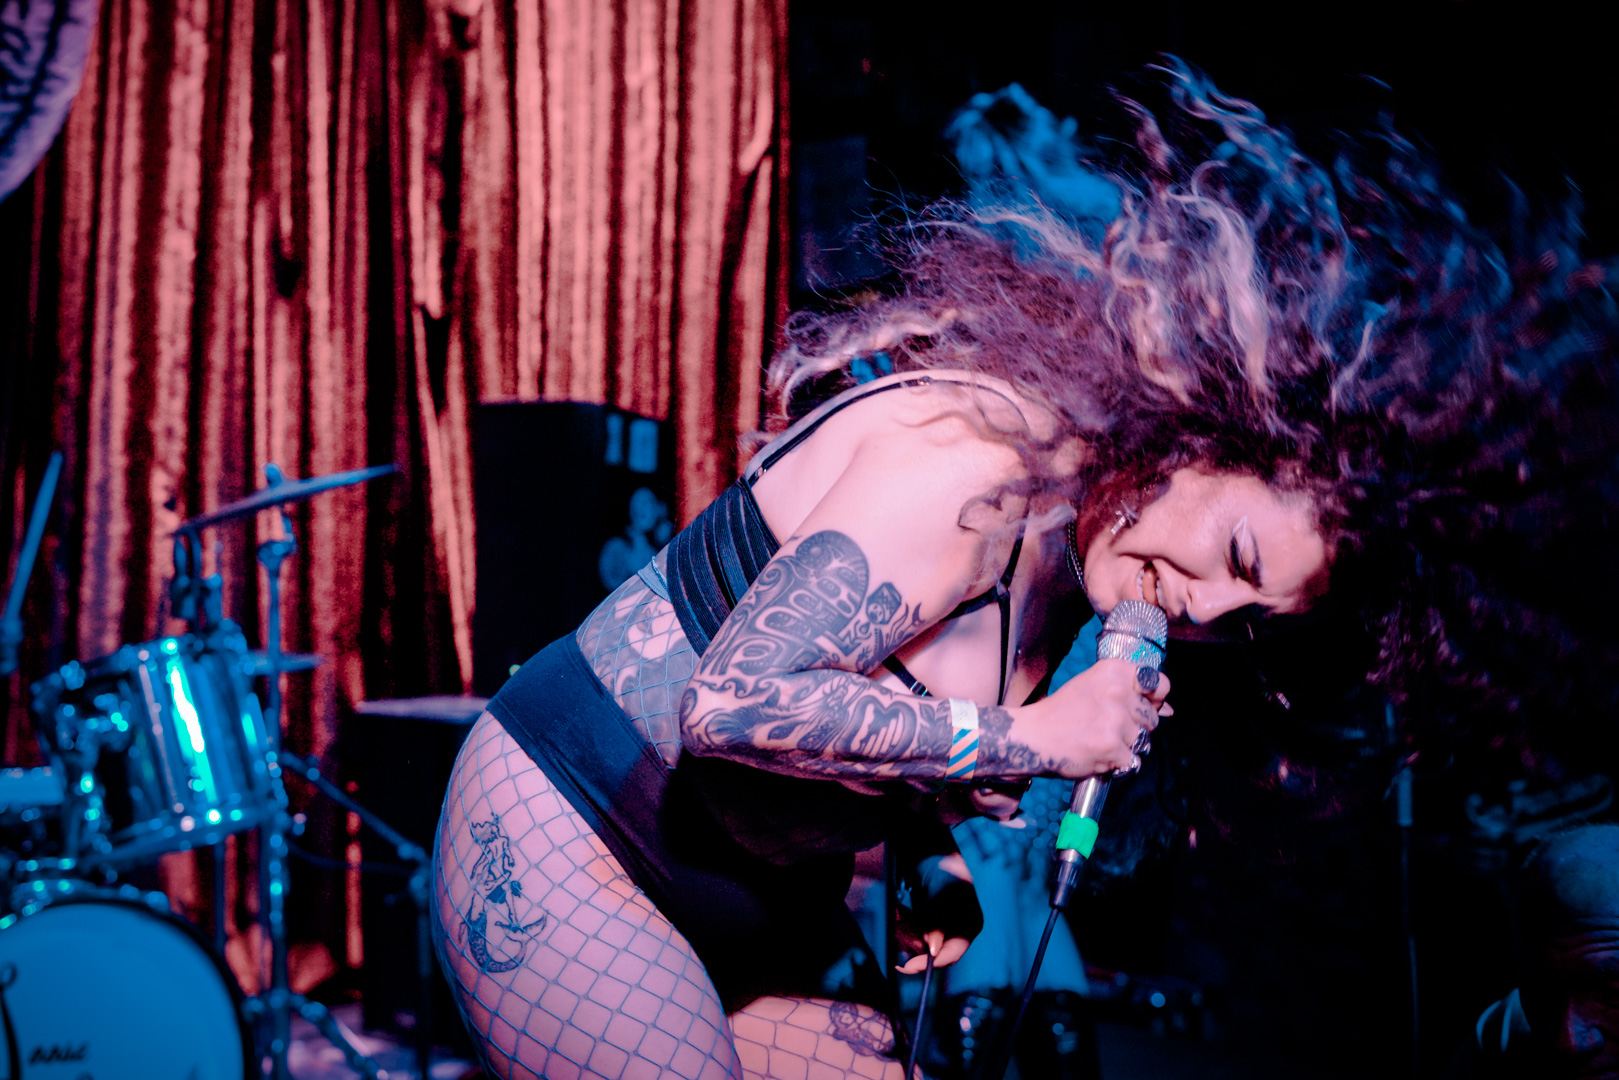 A woman headbangs with big hair on stage